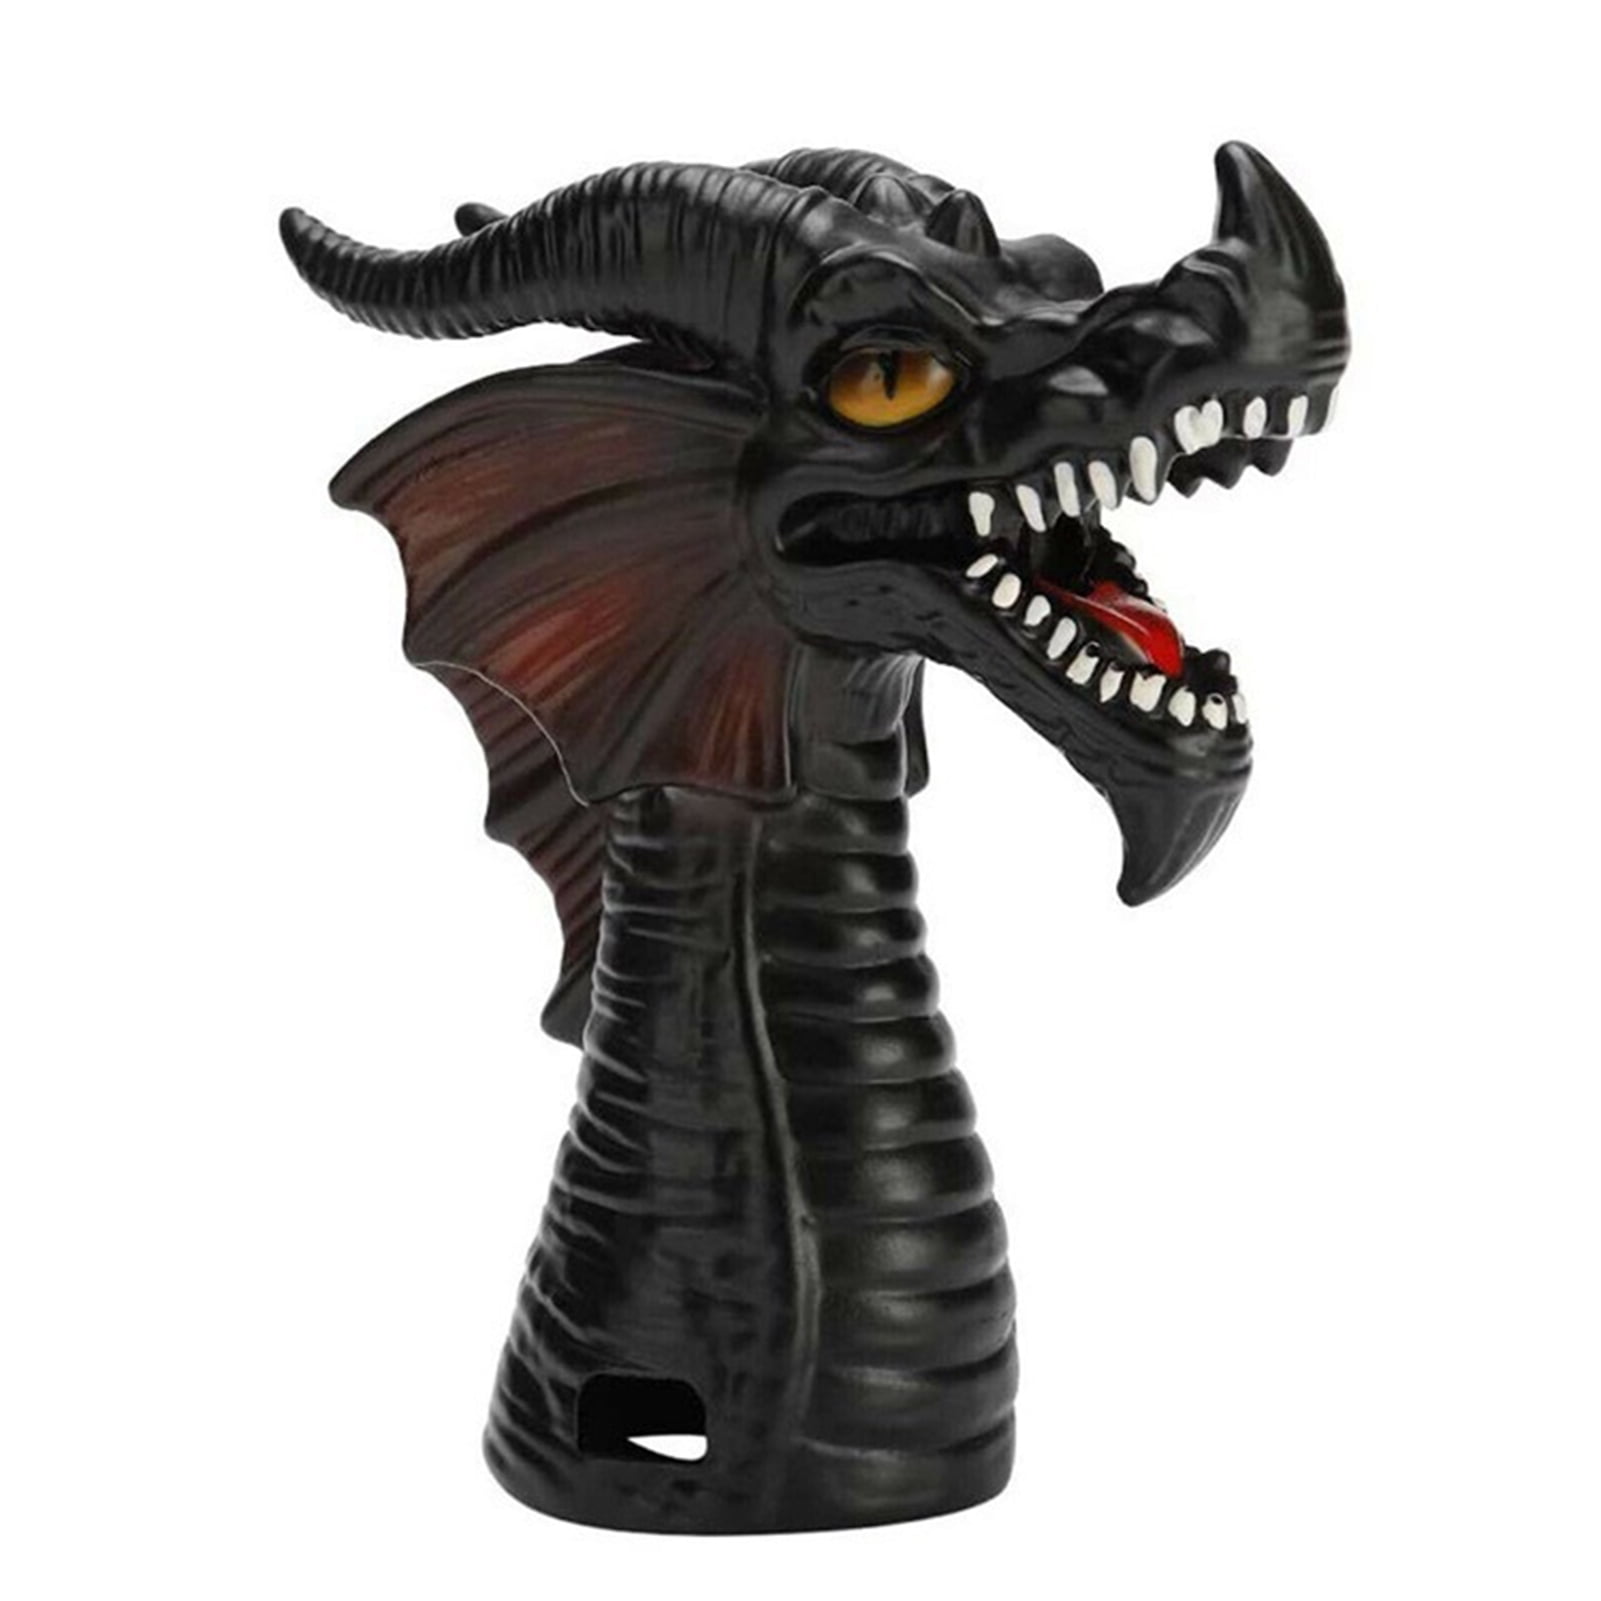 Details about   Fire-breathing Dragon Steam Release Accessory Diverter Tool for Pressure Cooker 